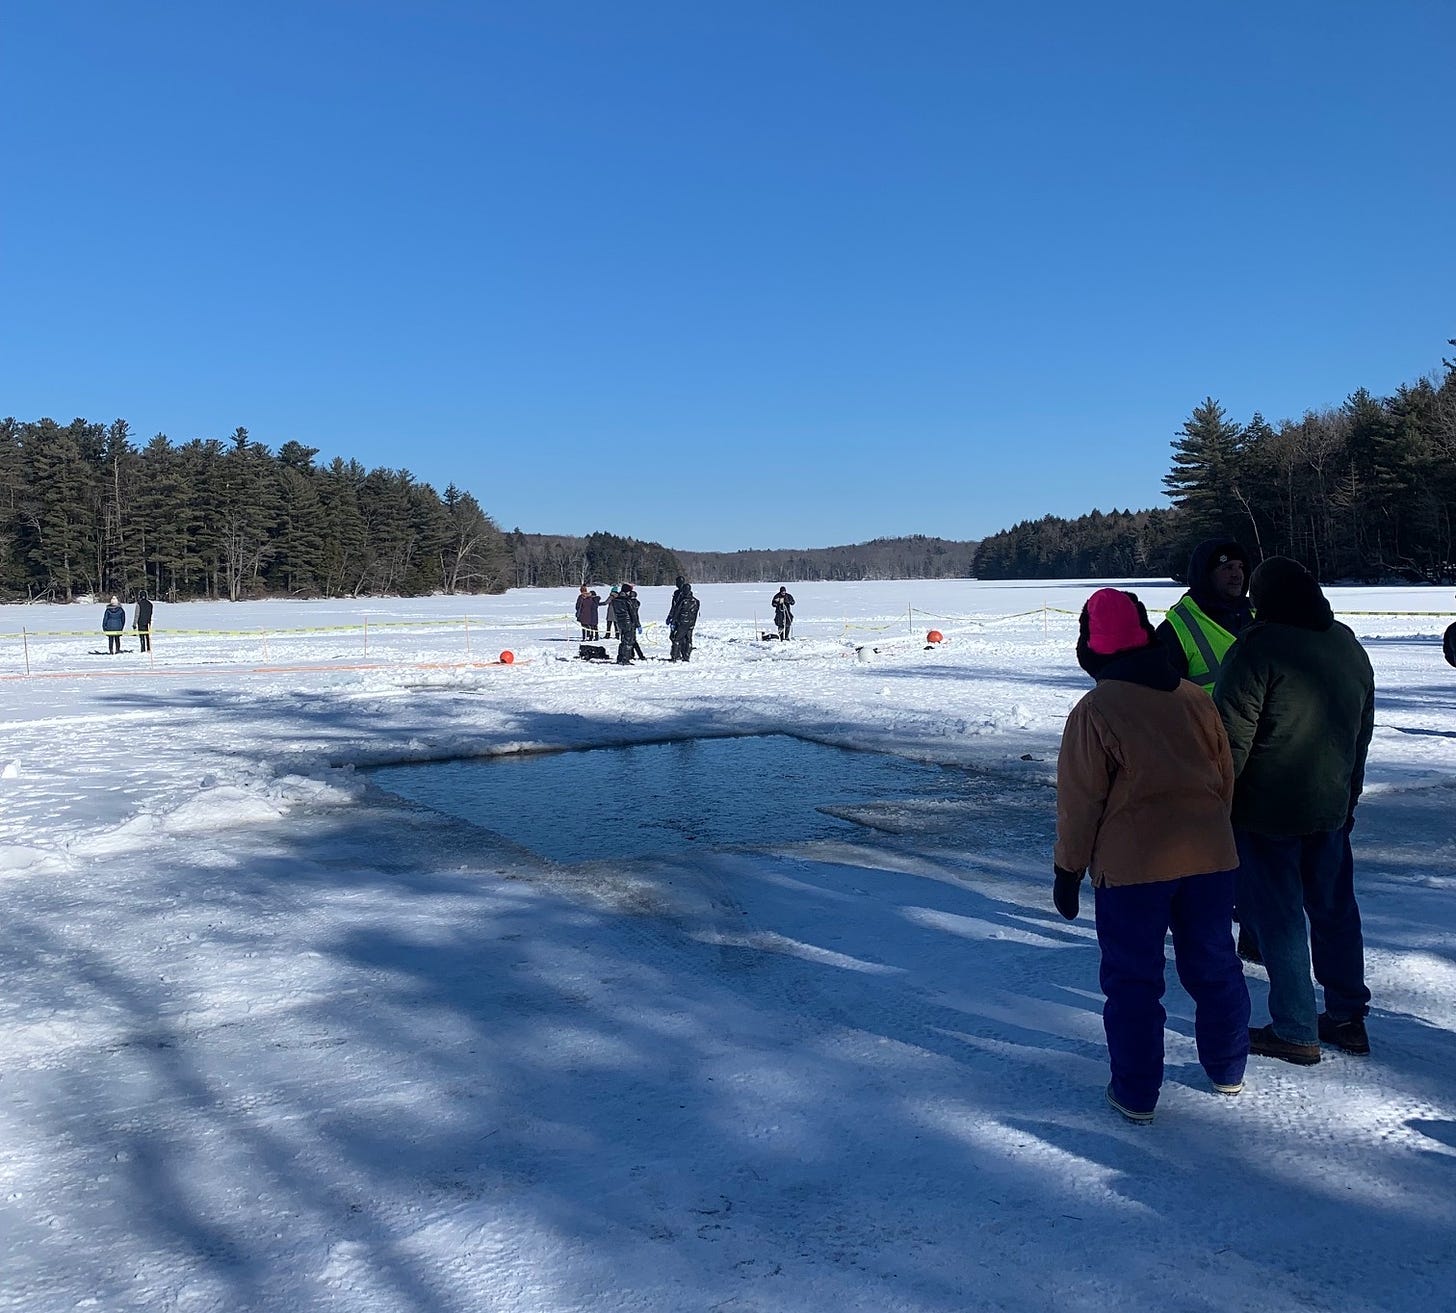 View of a frozen lake with scattered people and a square hole cut into the ice